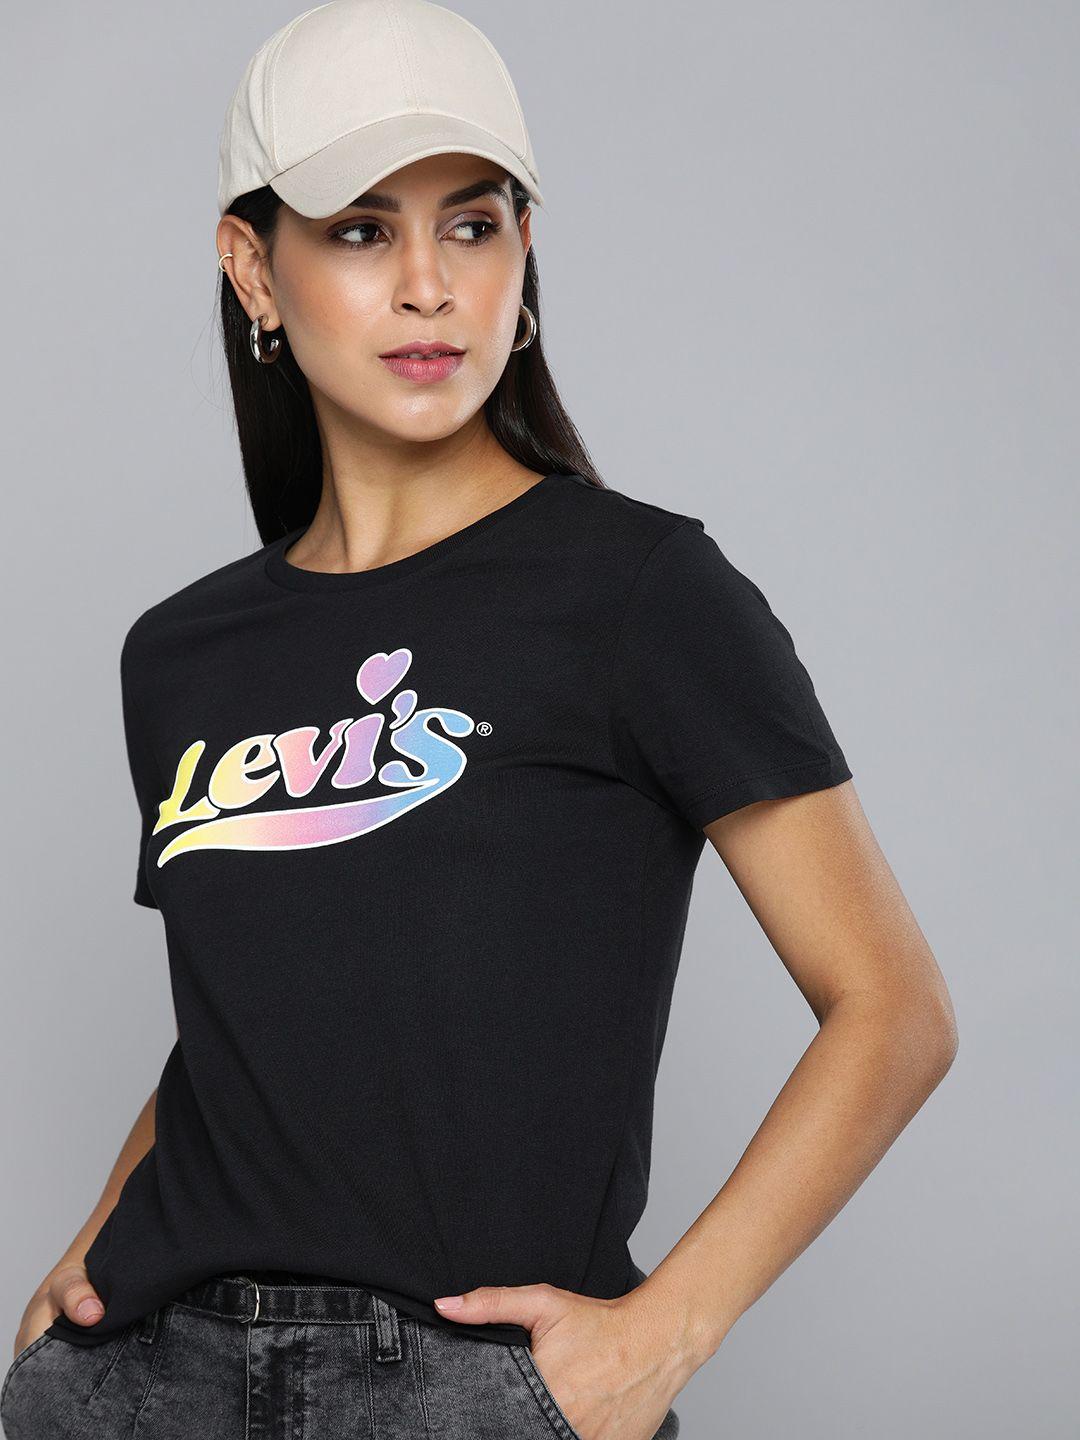 levis brand logo printed pure cotton casual t-shirt